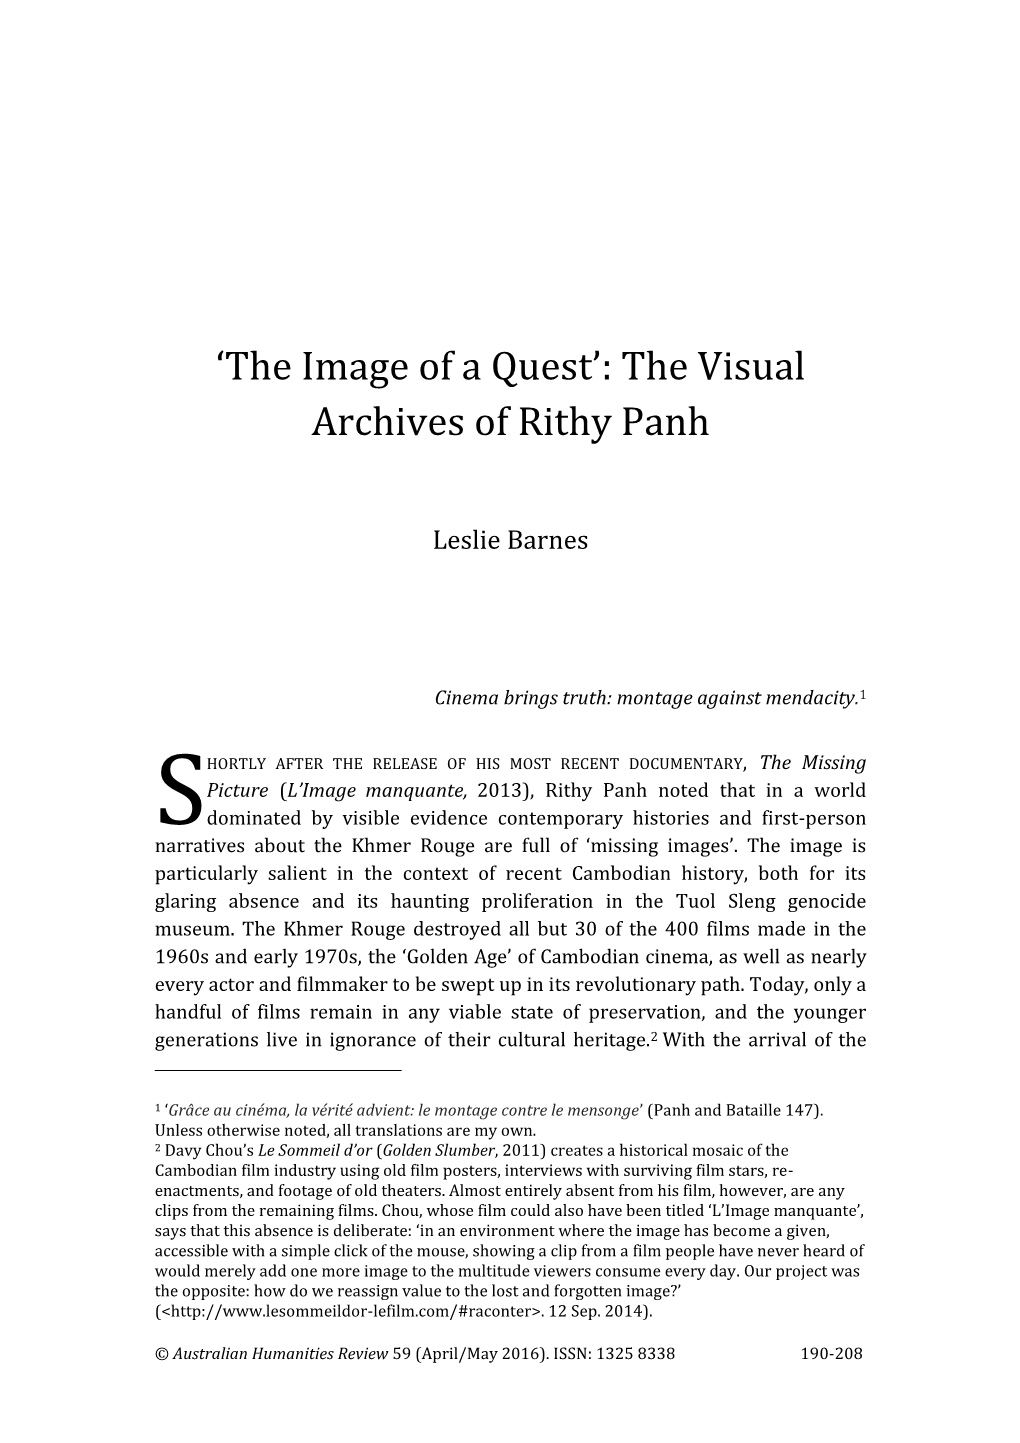 'The Image of a Quest': the Visual Archives of Rithy Panh